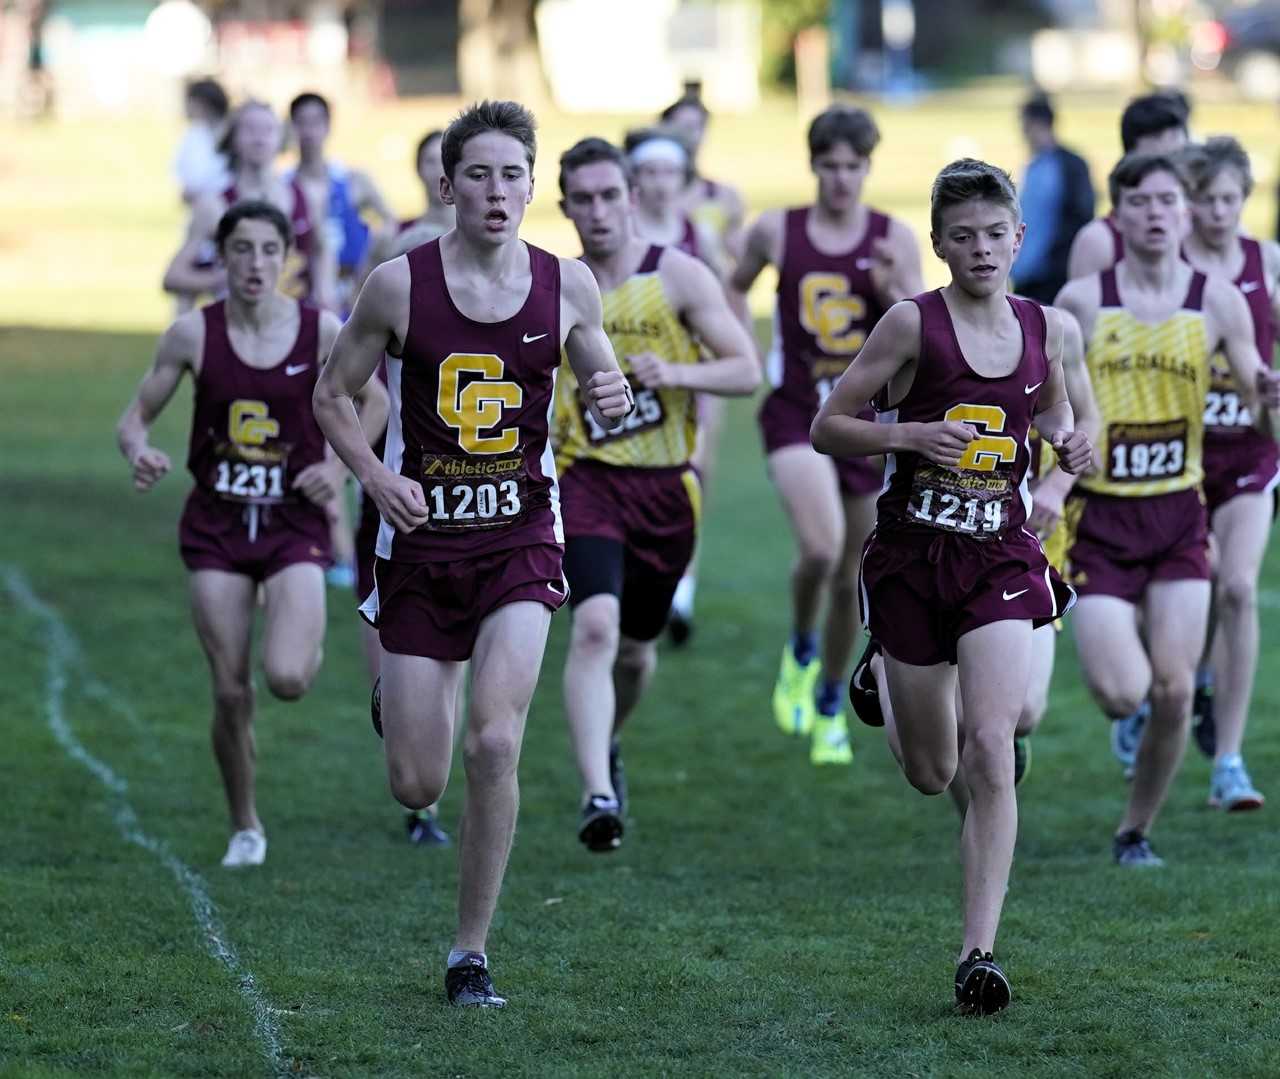 Central Catholic edged Clackamas by two points to win the Mt. Hood Conference district meet. (Photo by Jon Olson)